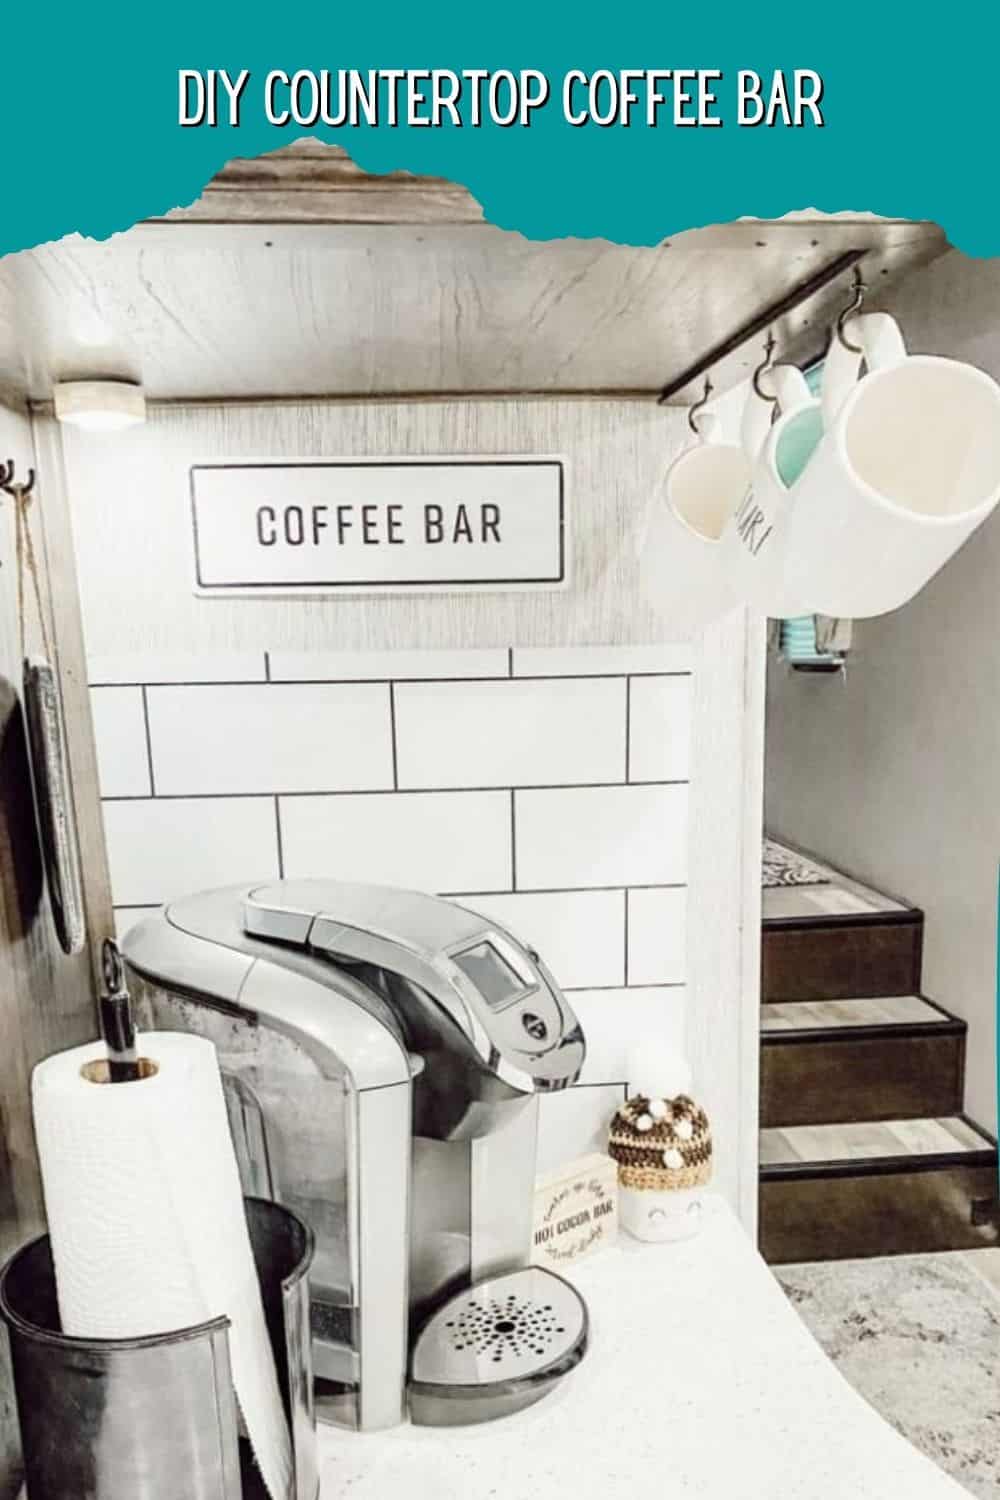 15 DIY Coffee Bar Ideas for Your Home - The Handyman's Daughter